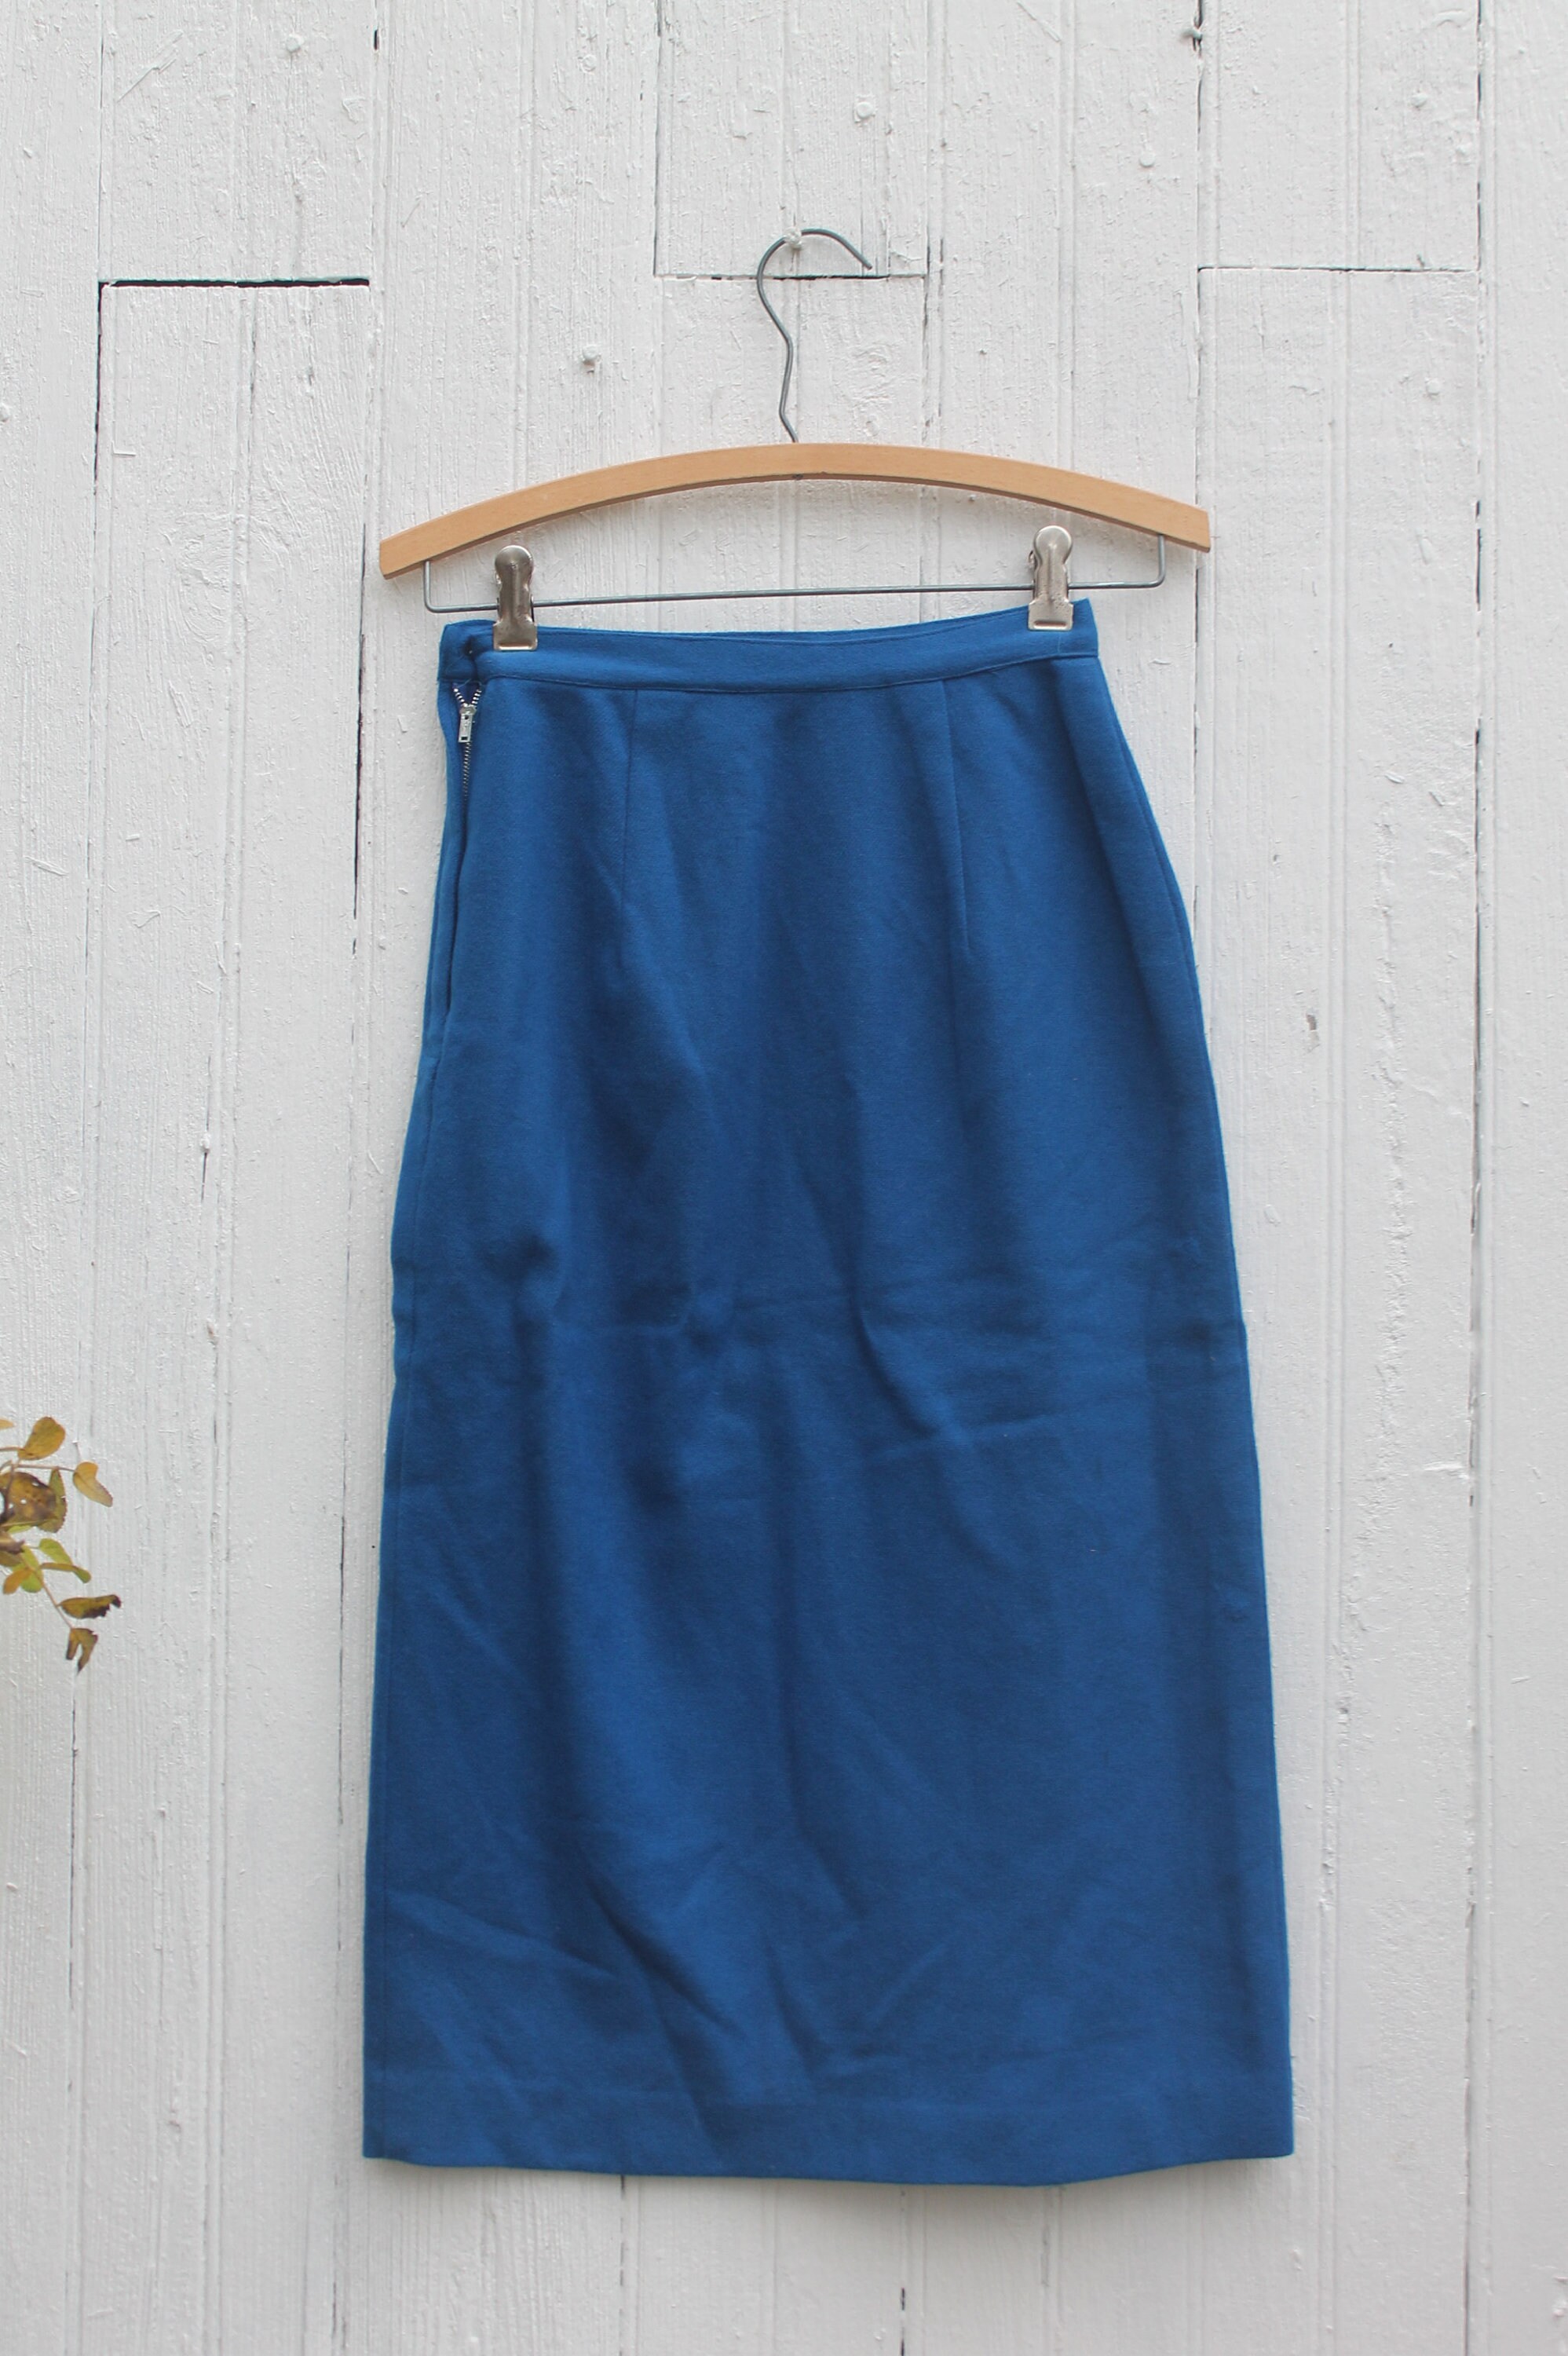 1970s blue wool skirt side zipper pleated with decorative | Etsy